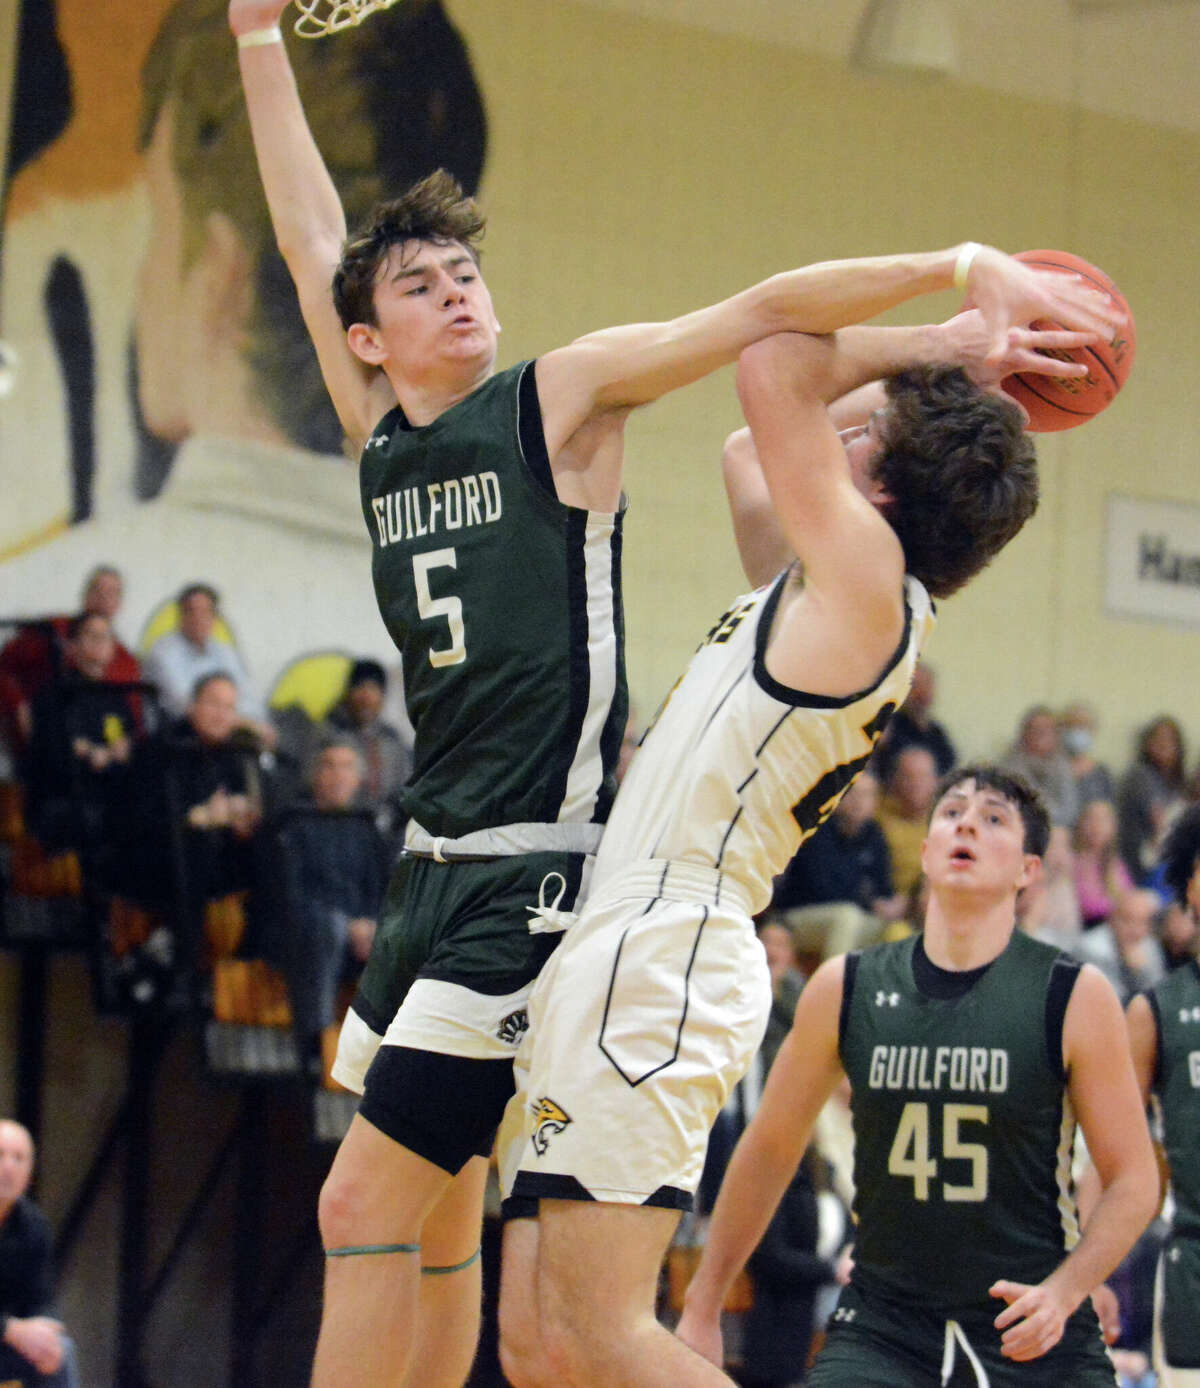 Guilford's Justin Hess blocks a shot by Sam Markovitz of Hand during their SCC boys basketball game Thursday, Jan. 19, 2023.